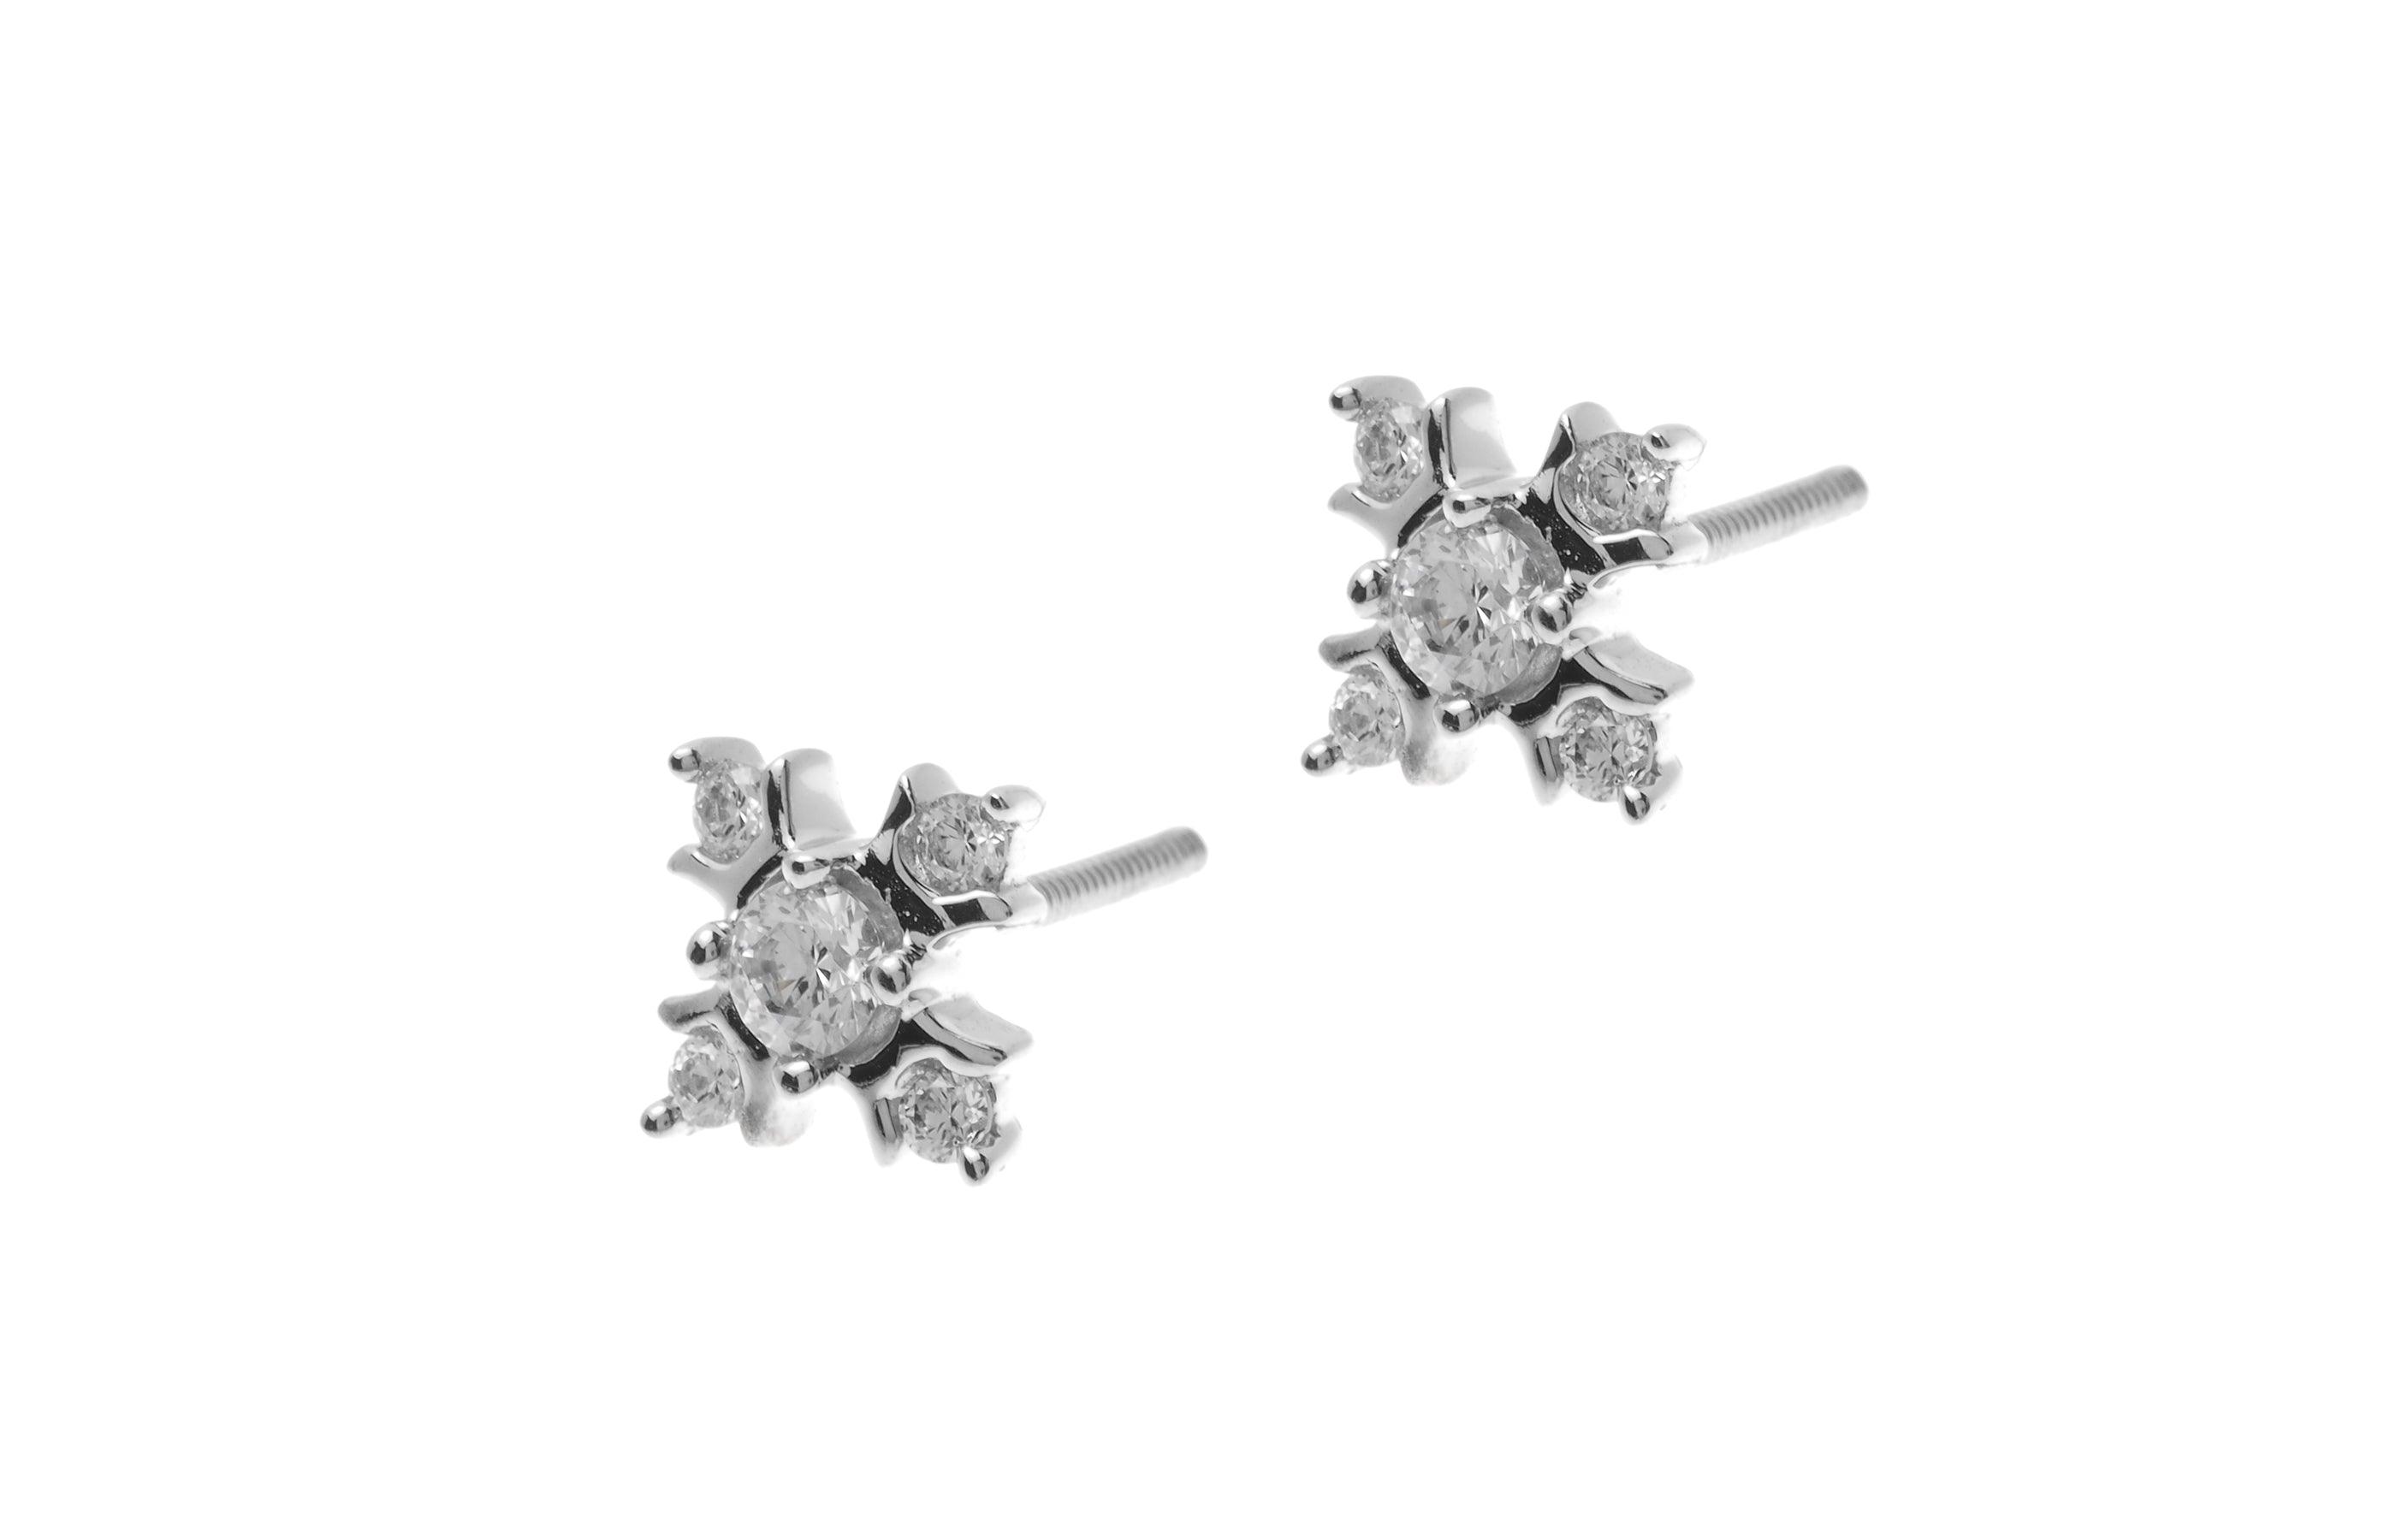 18ct White Gold Earrings set with Cubic Zirconia stones (2.99g) ET7064 - Minar Jewellers